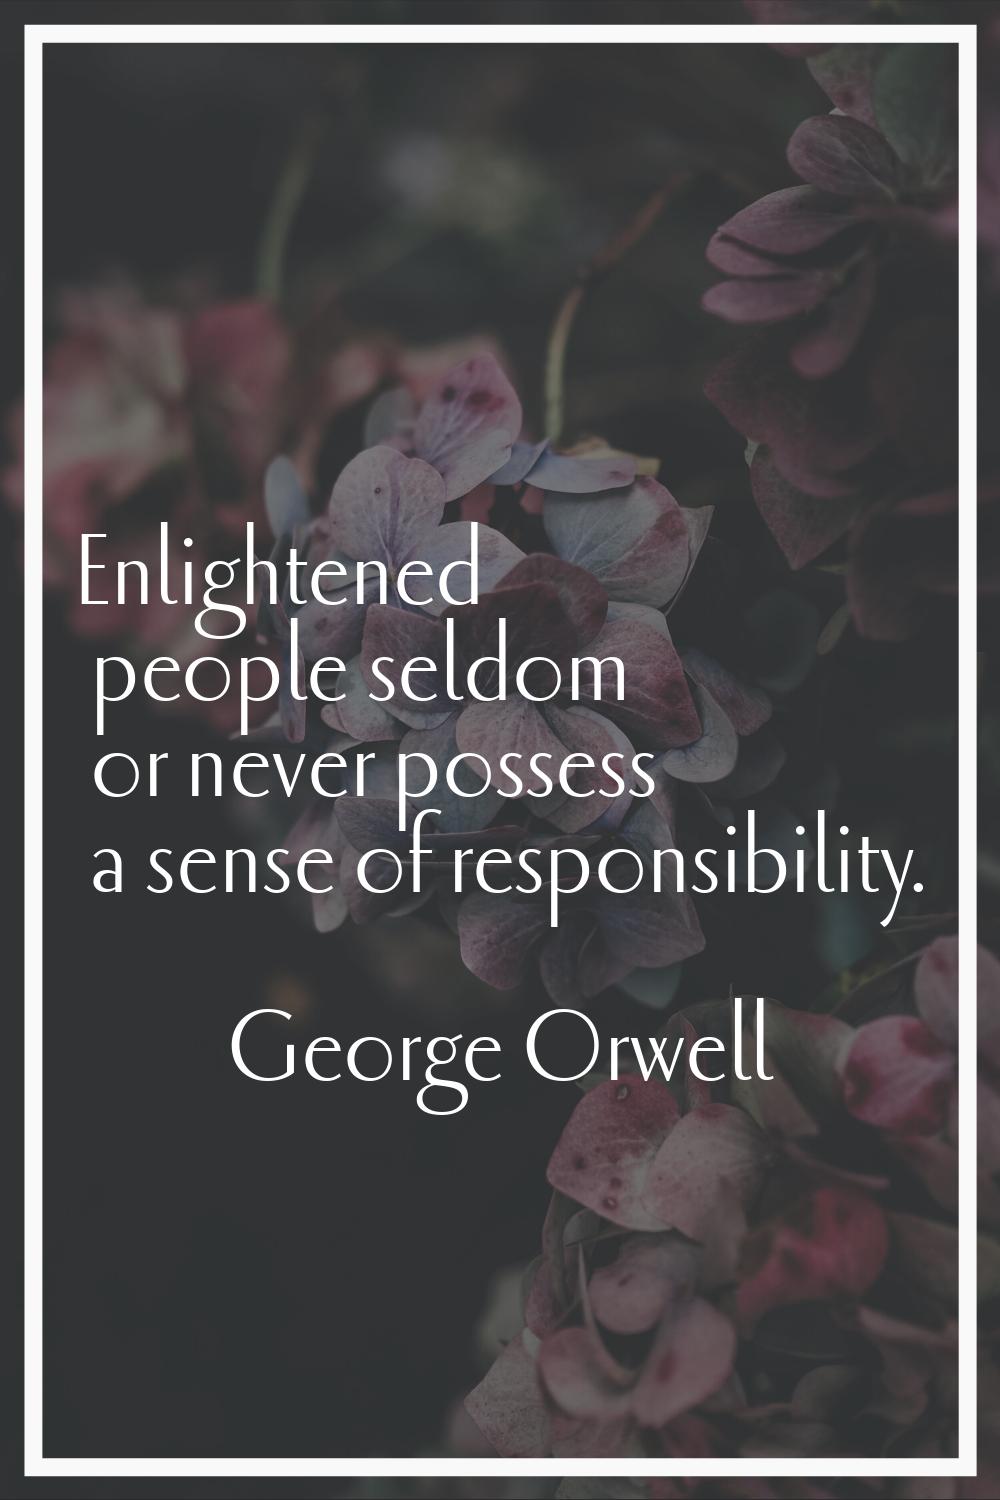 Enlightened people seldom or never possess a sense of responsibility.